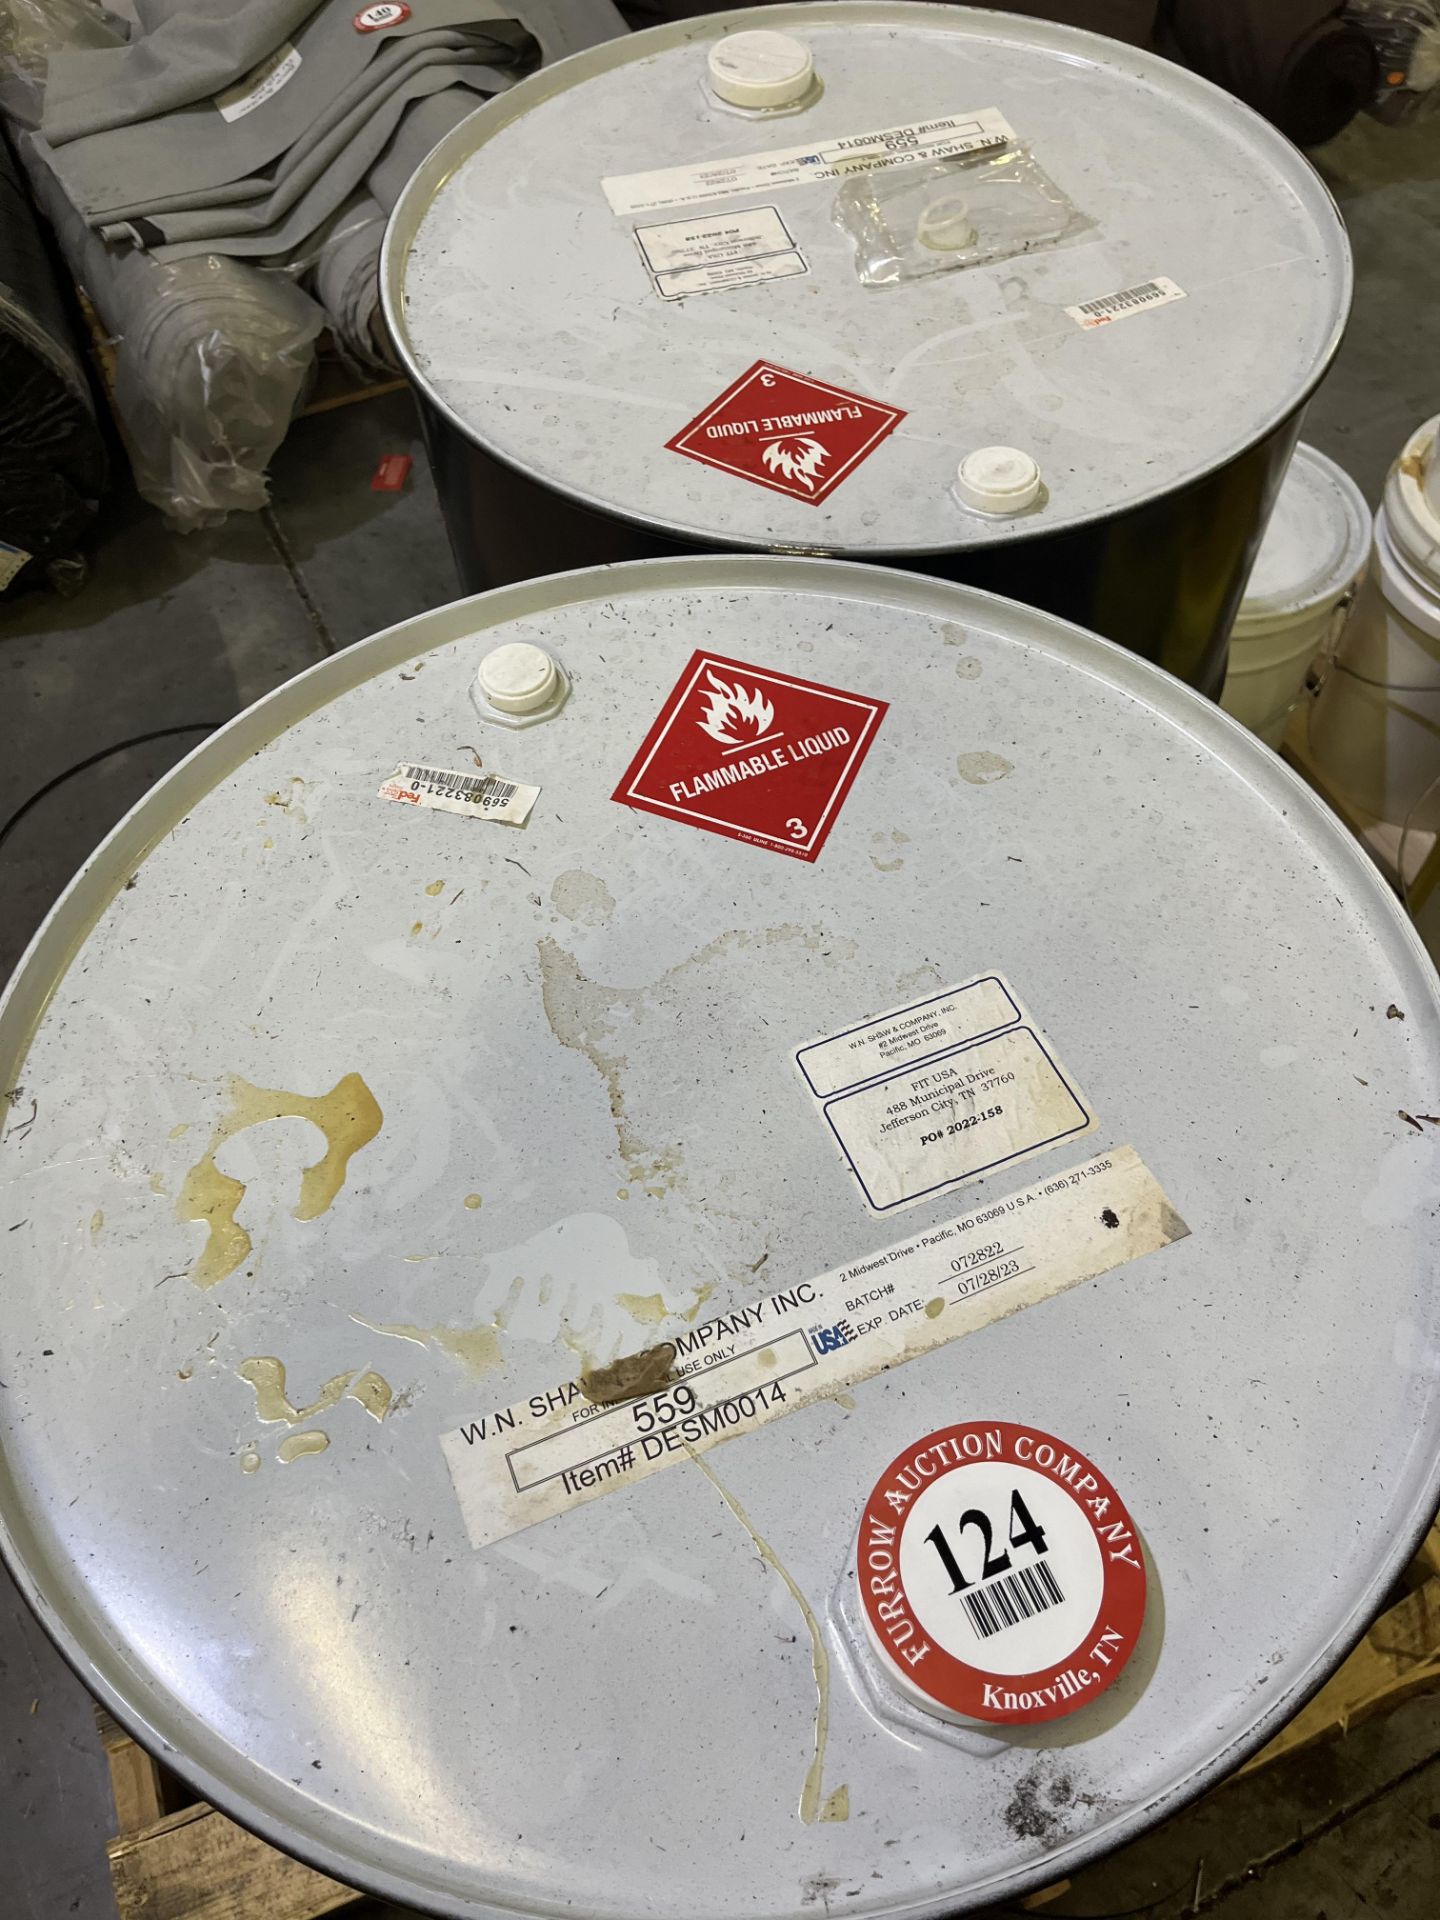 (2) 50-gallon drums of mold release agents